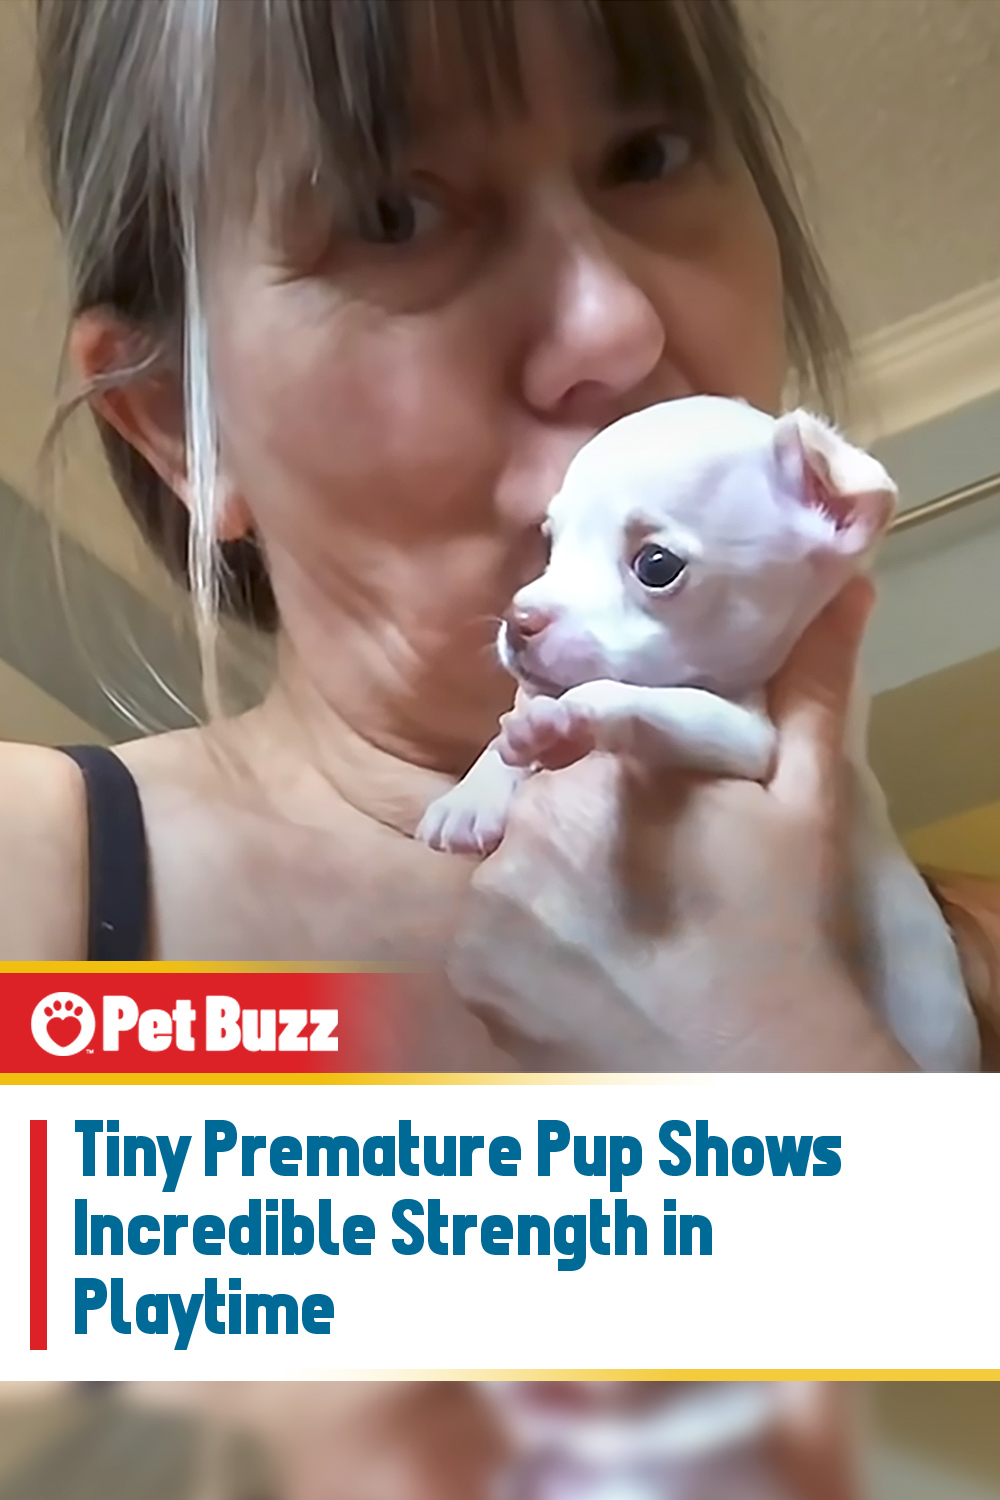 Tiny Premature Pup Shows Incredible Strength in Playtime